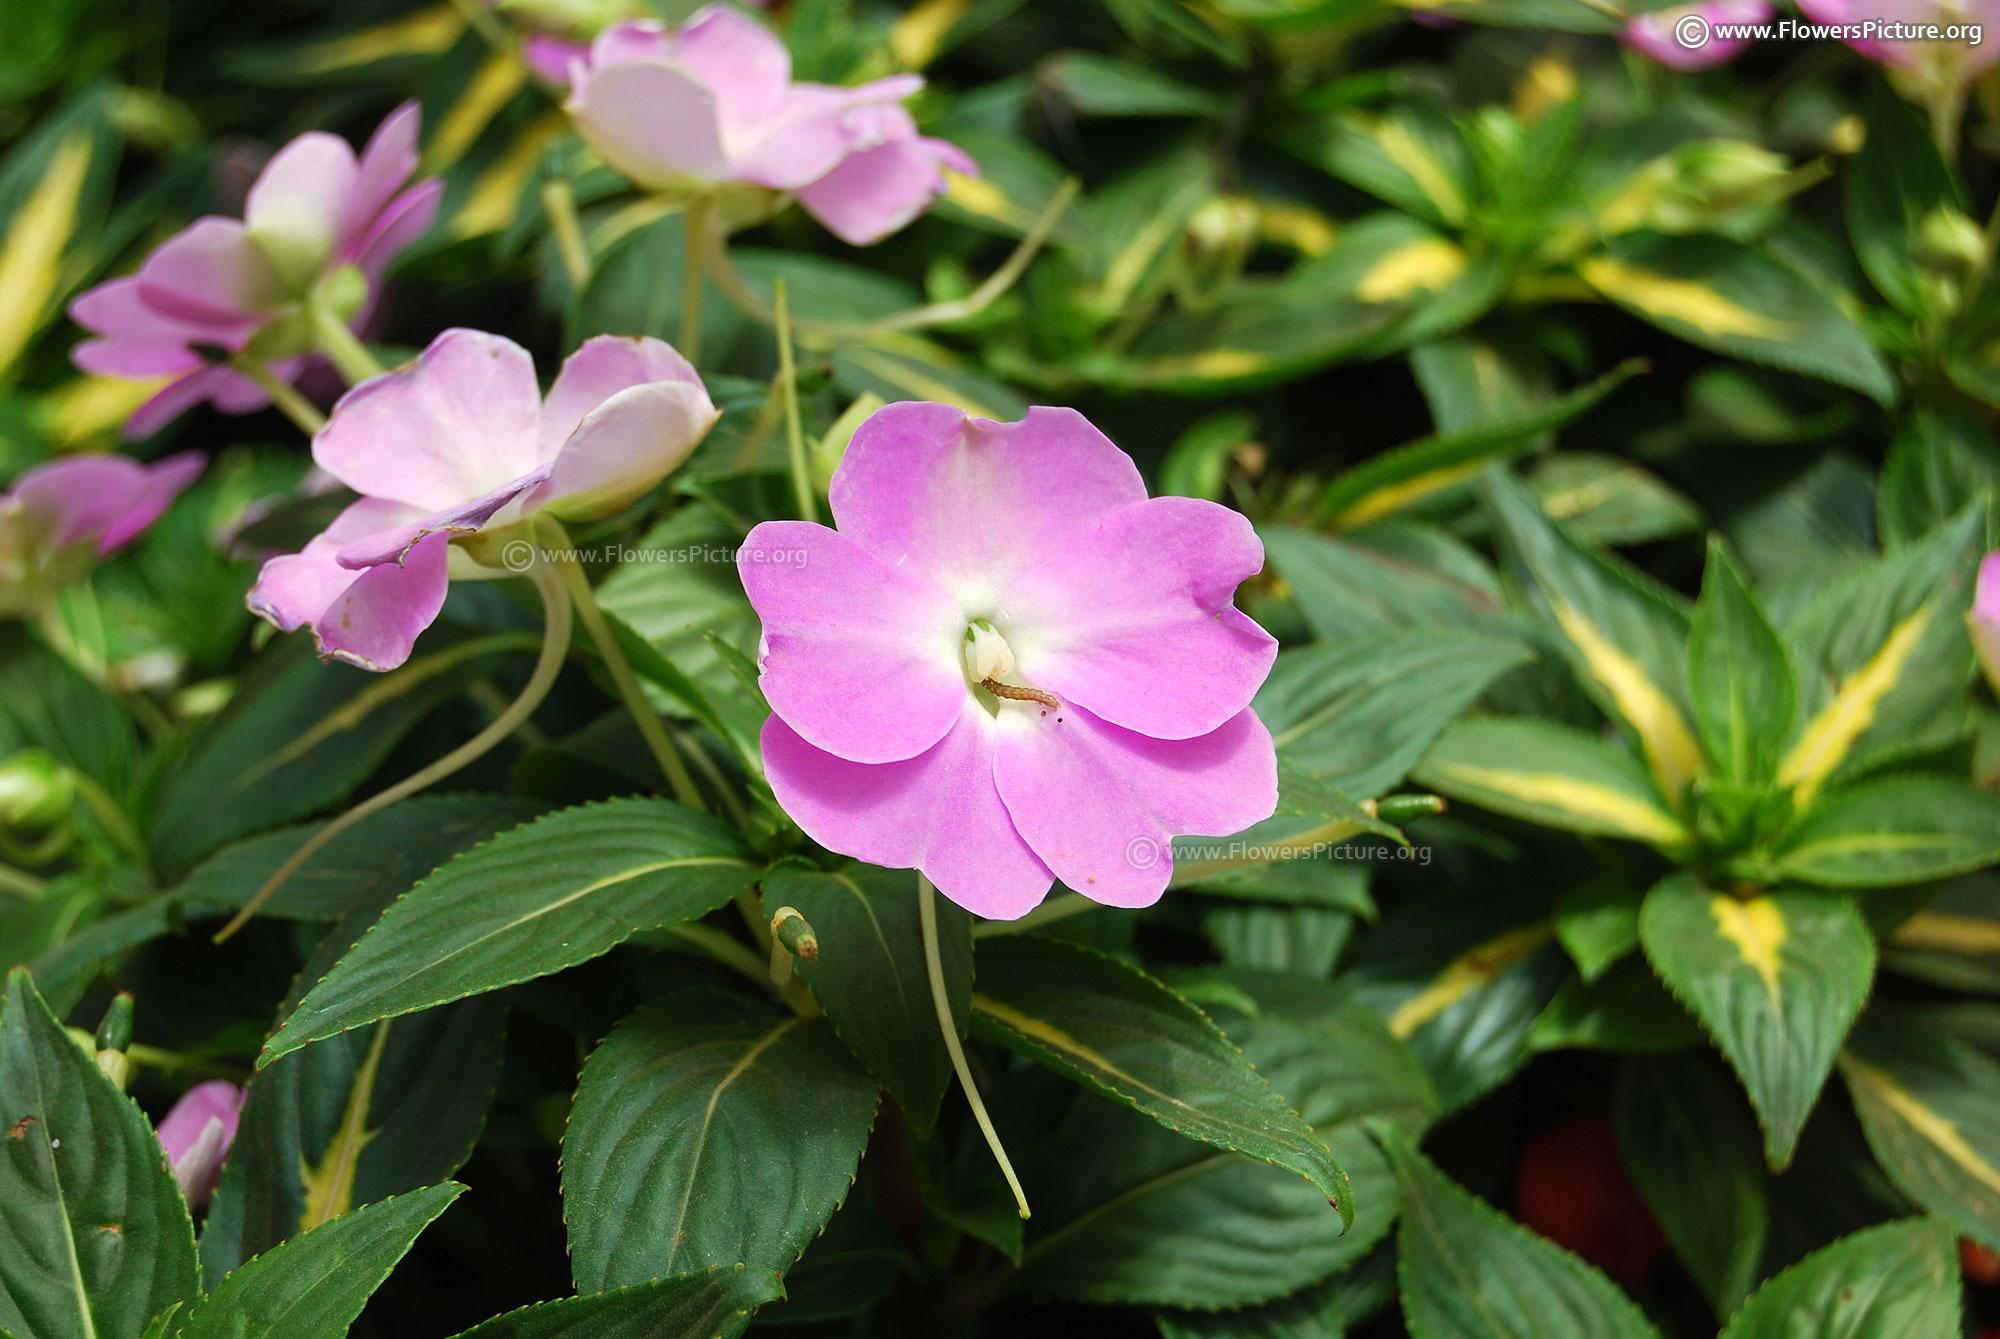 Flowers by Name-N-new guinea impatiens